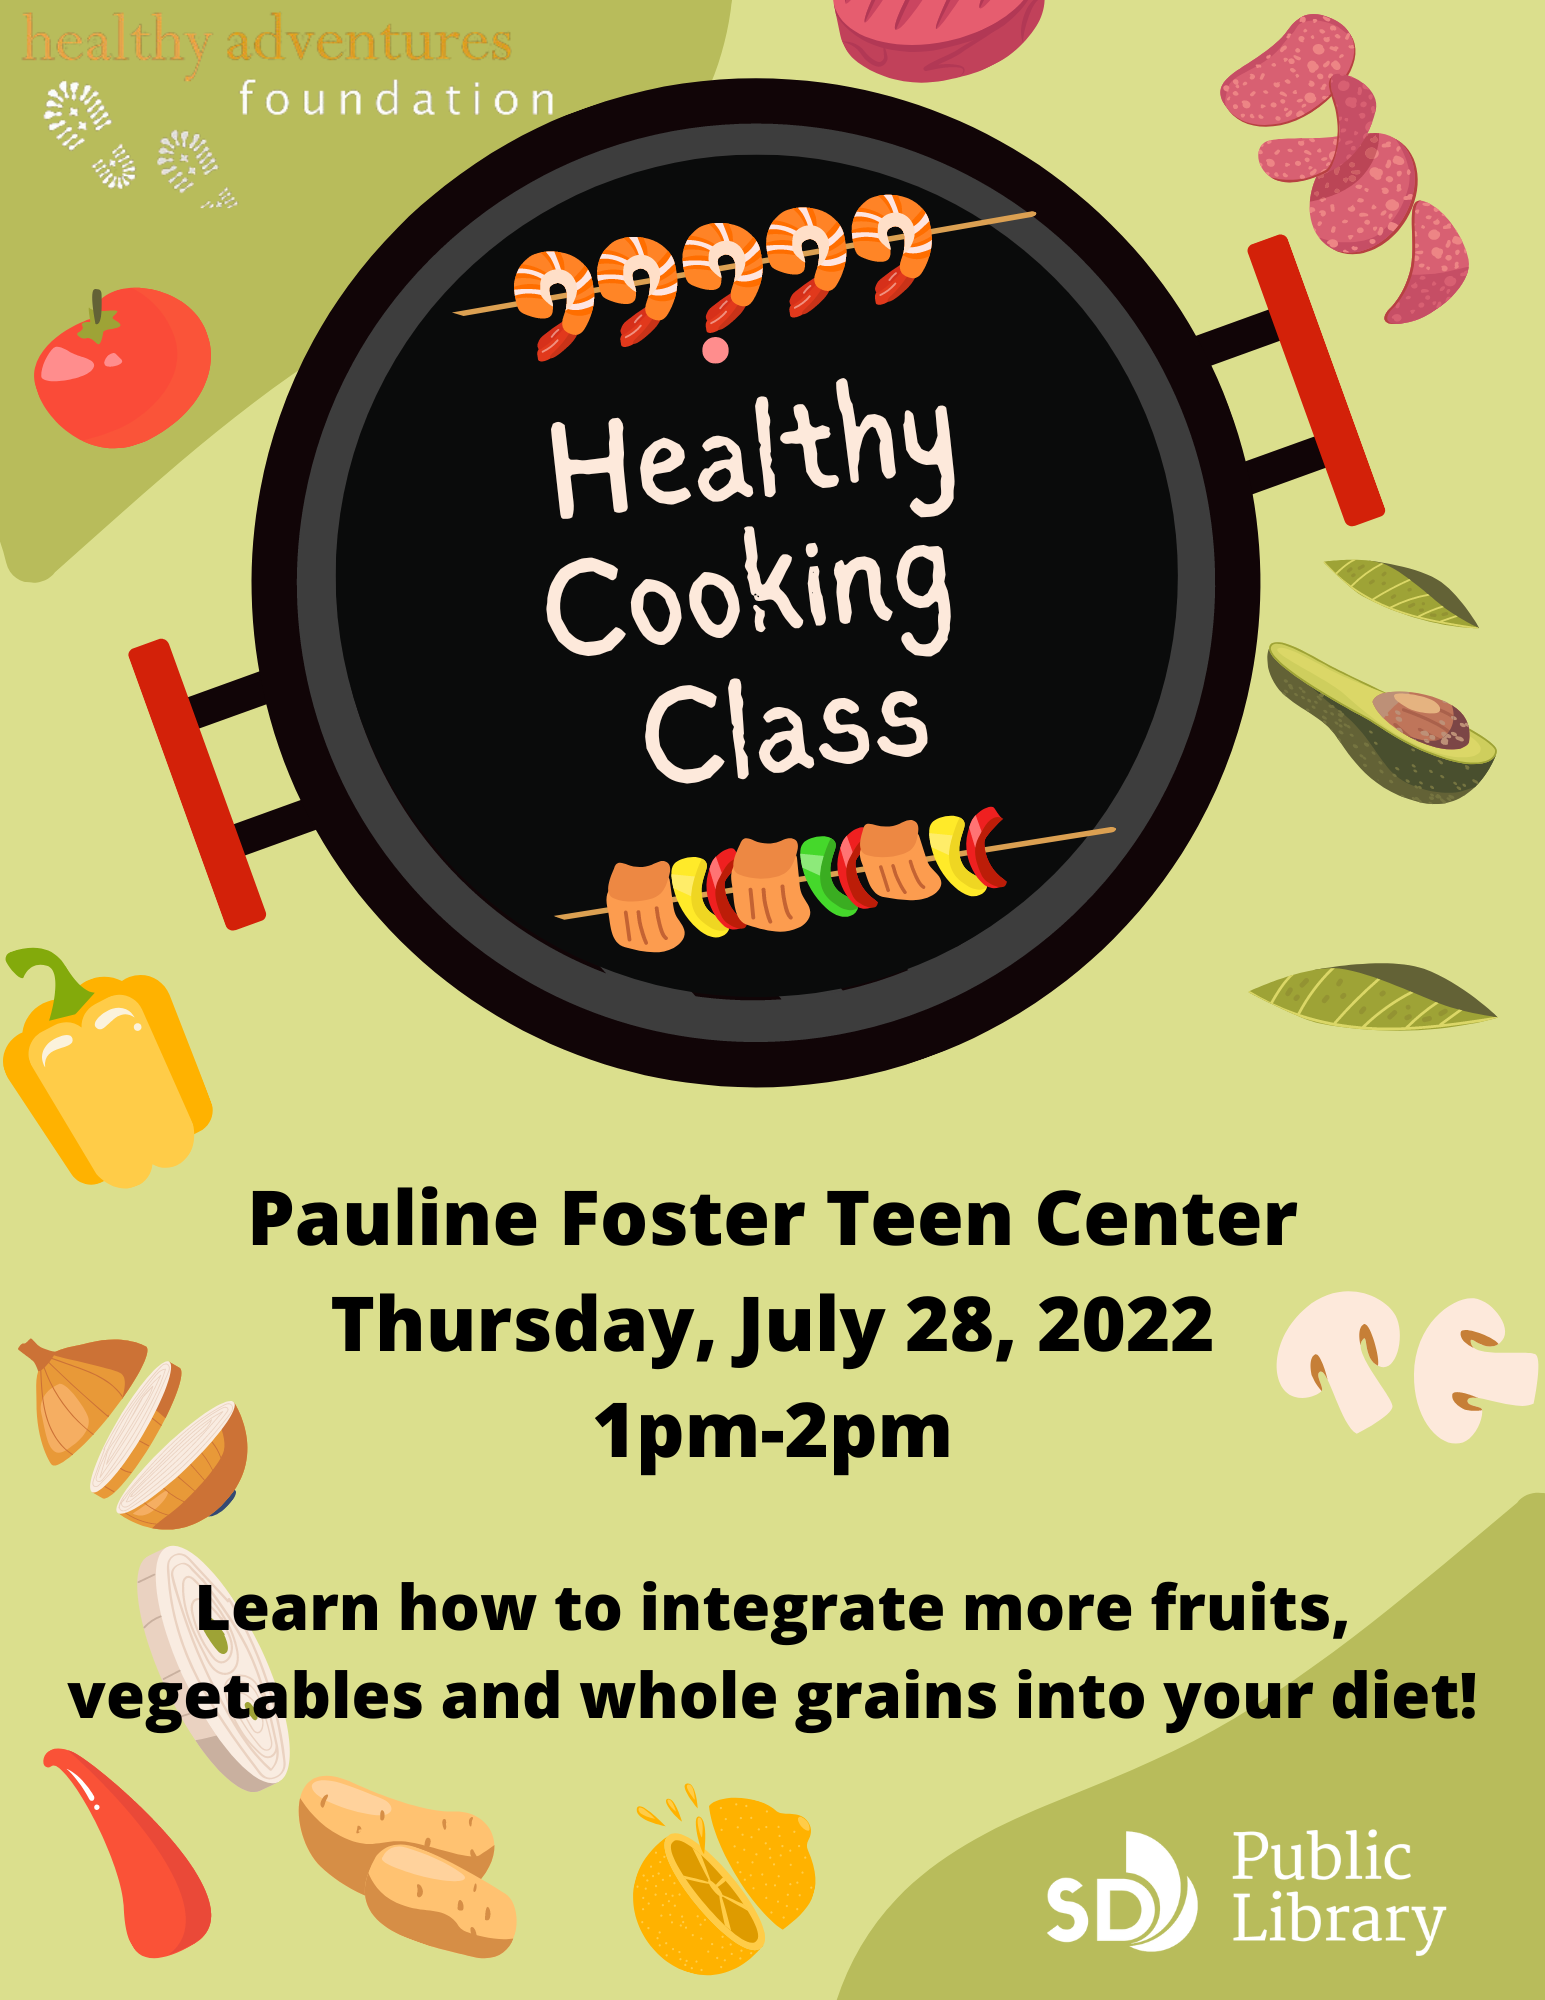 healthy cooking classes flyer